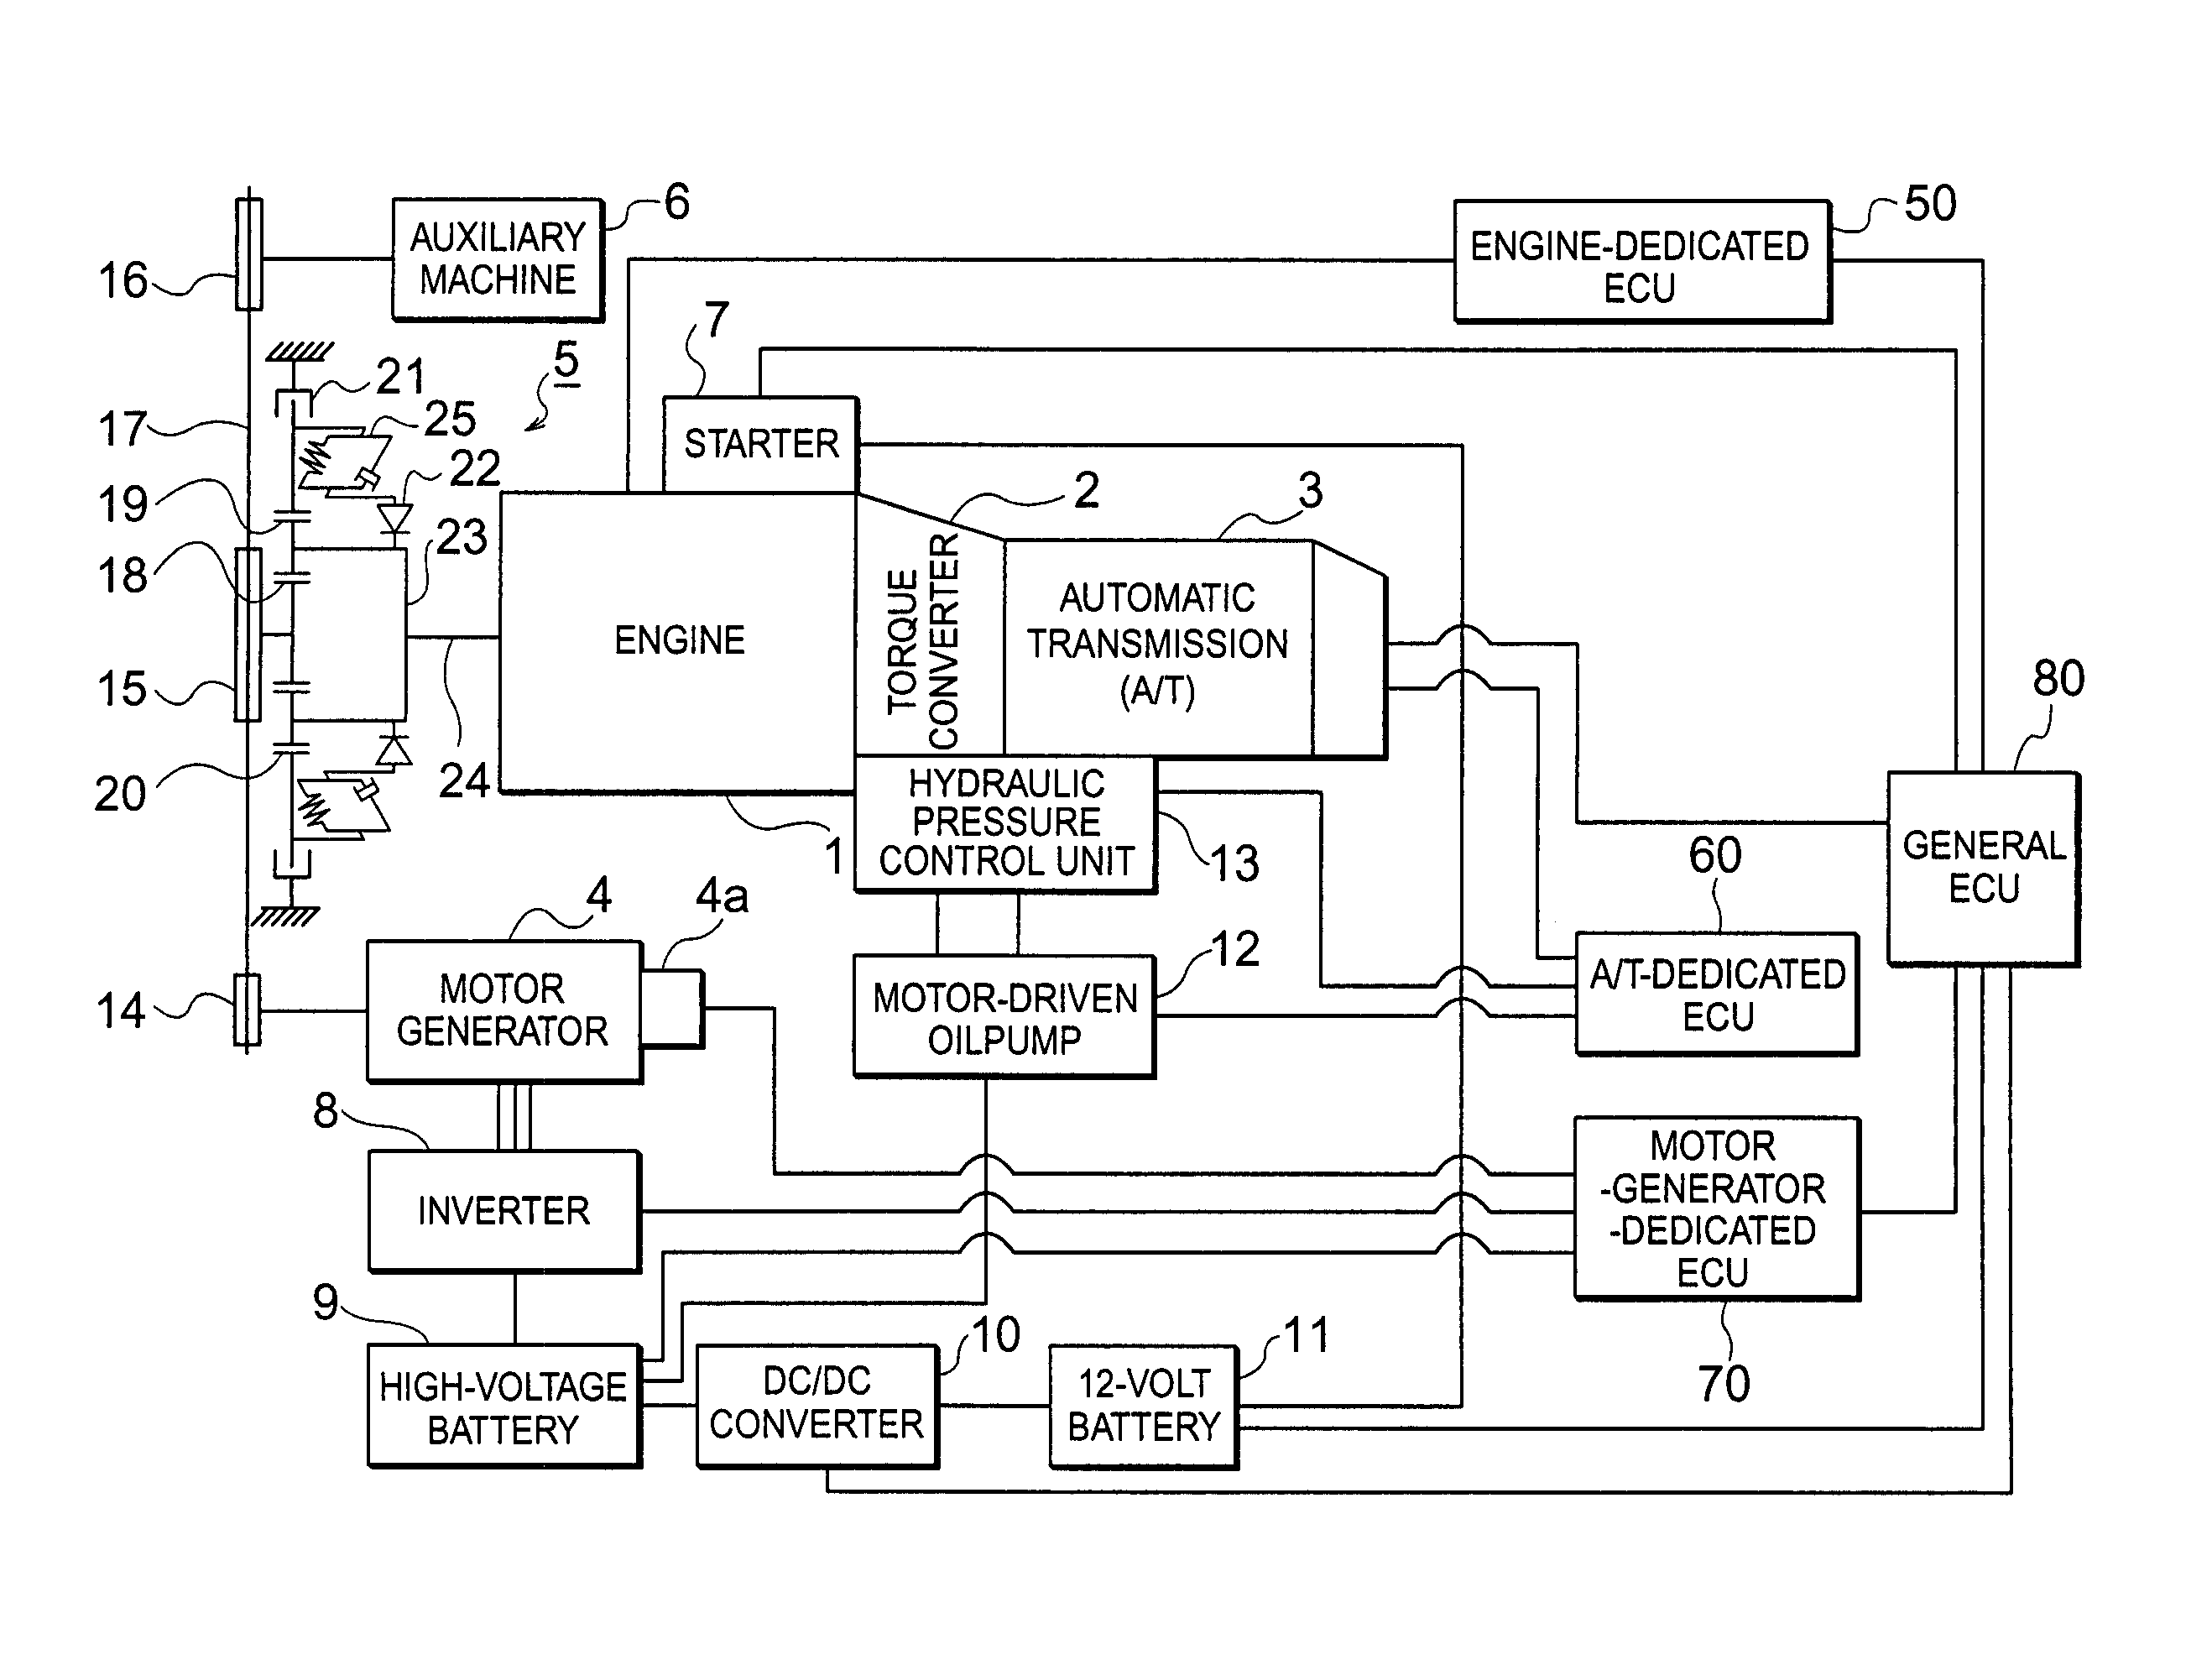 Transmission gear apparatus for motor vehicle